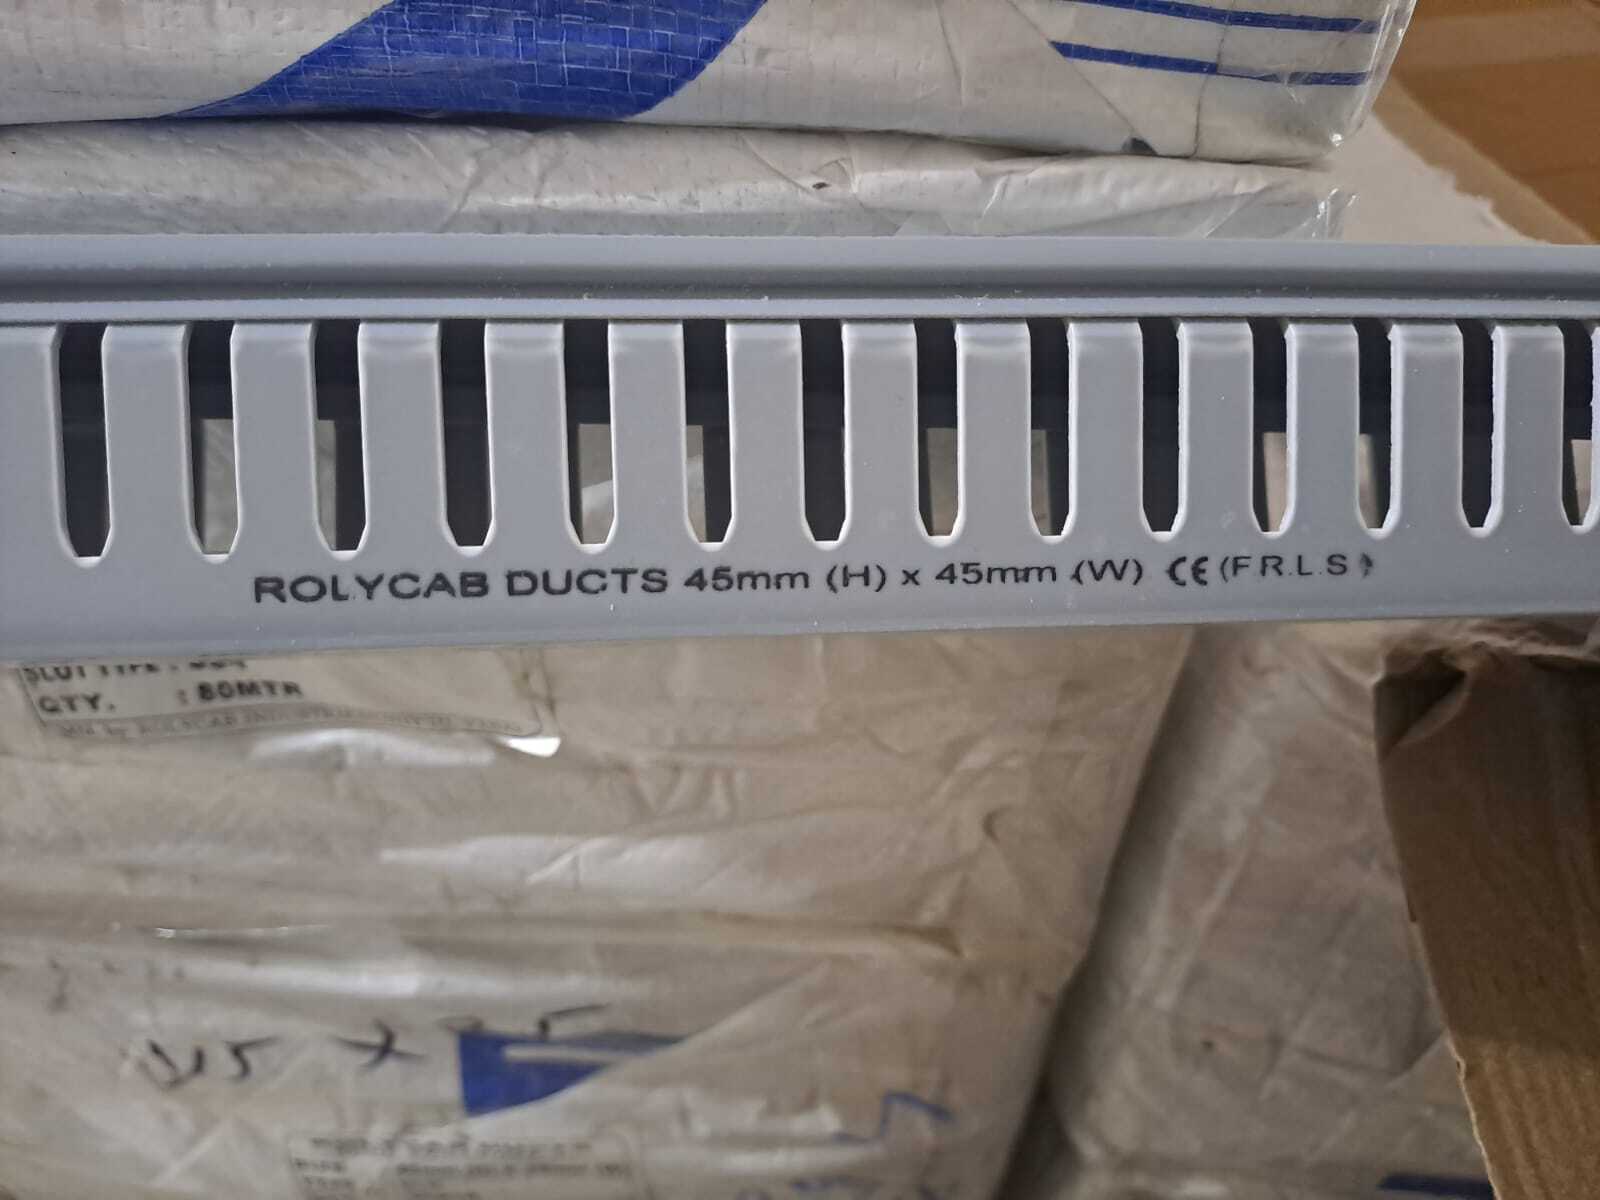 Grey cable ducts